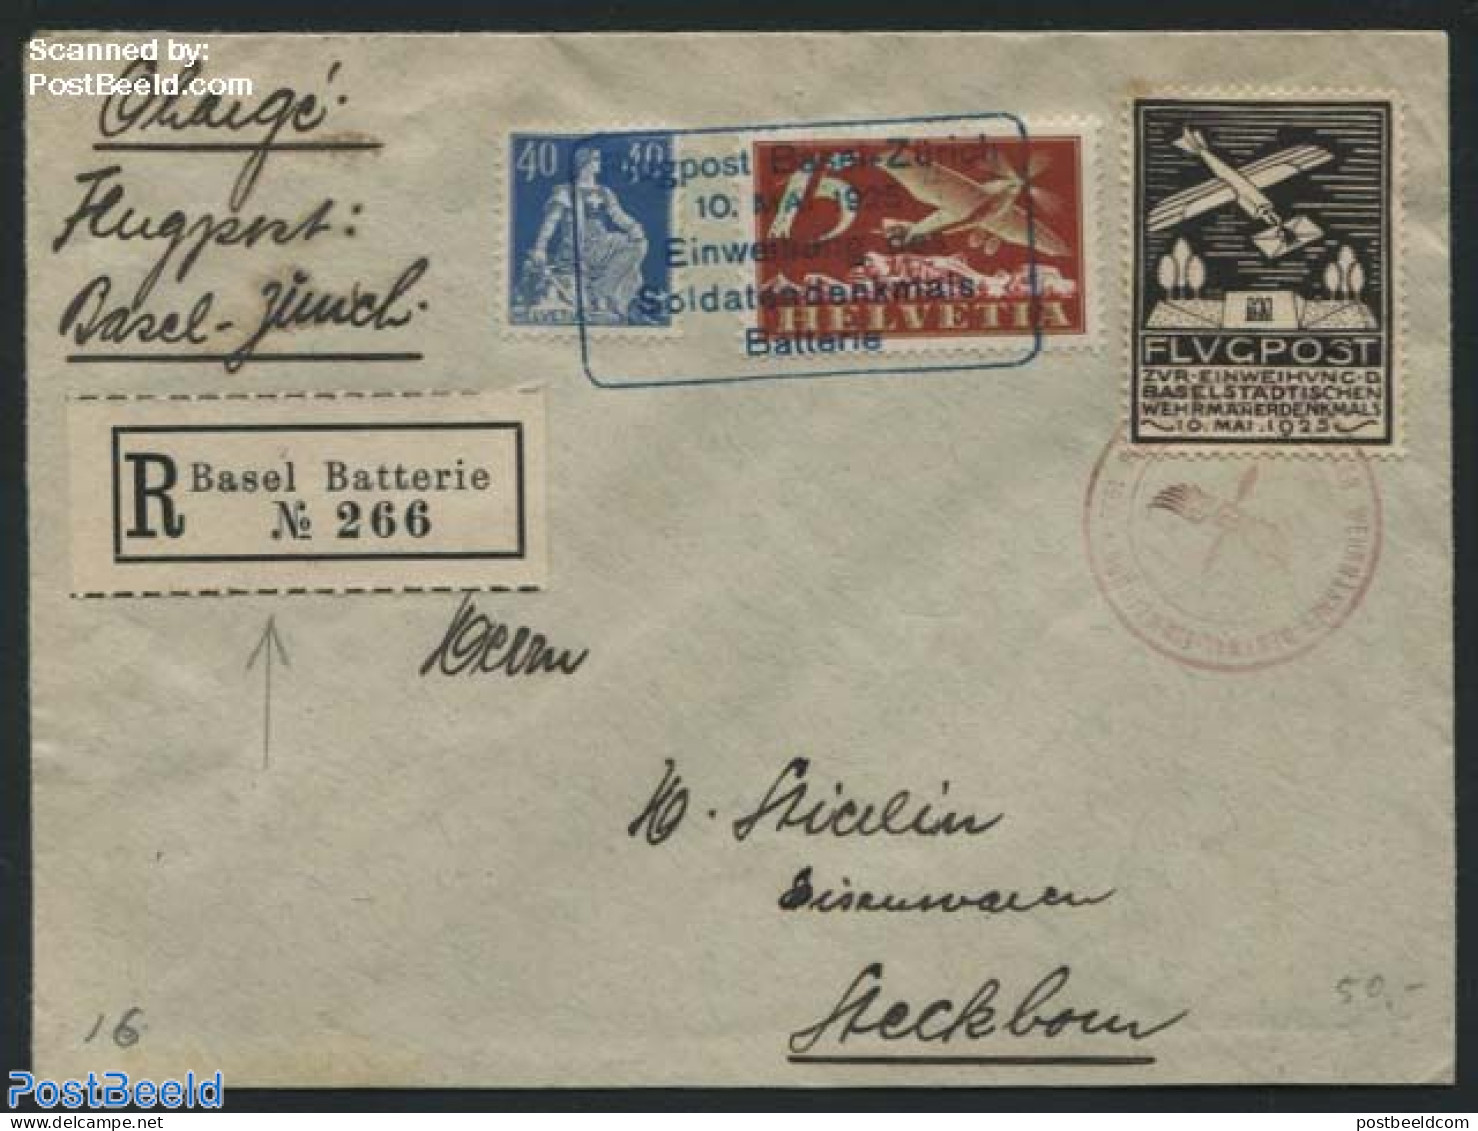 Switzerland 1925 Airmail Letter Registered, With Seal, Postal History, Transport - Aircraft & Aviation - Lettres & Documents